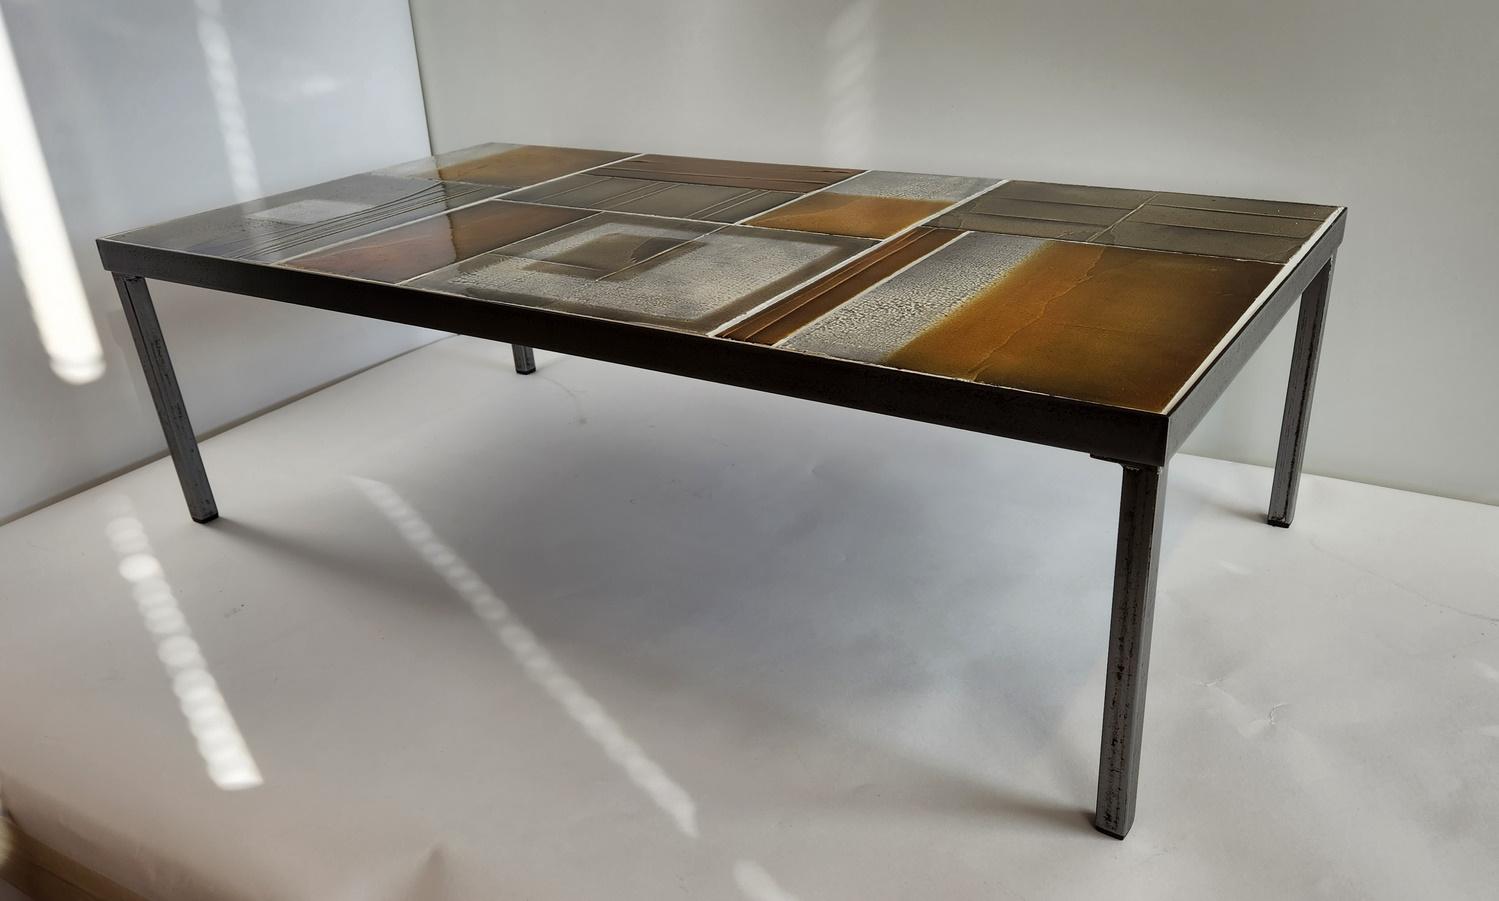 French Roger Capron - 1970's Coffee Table with Lava Tiles Series on a Metal Frame  For Sale